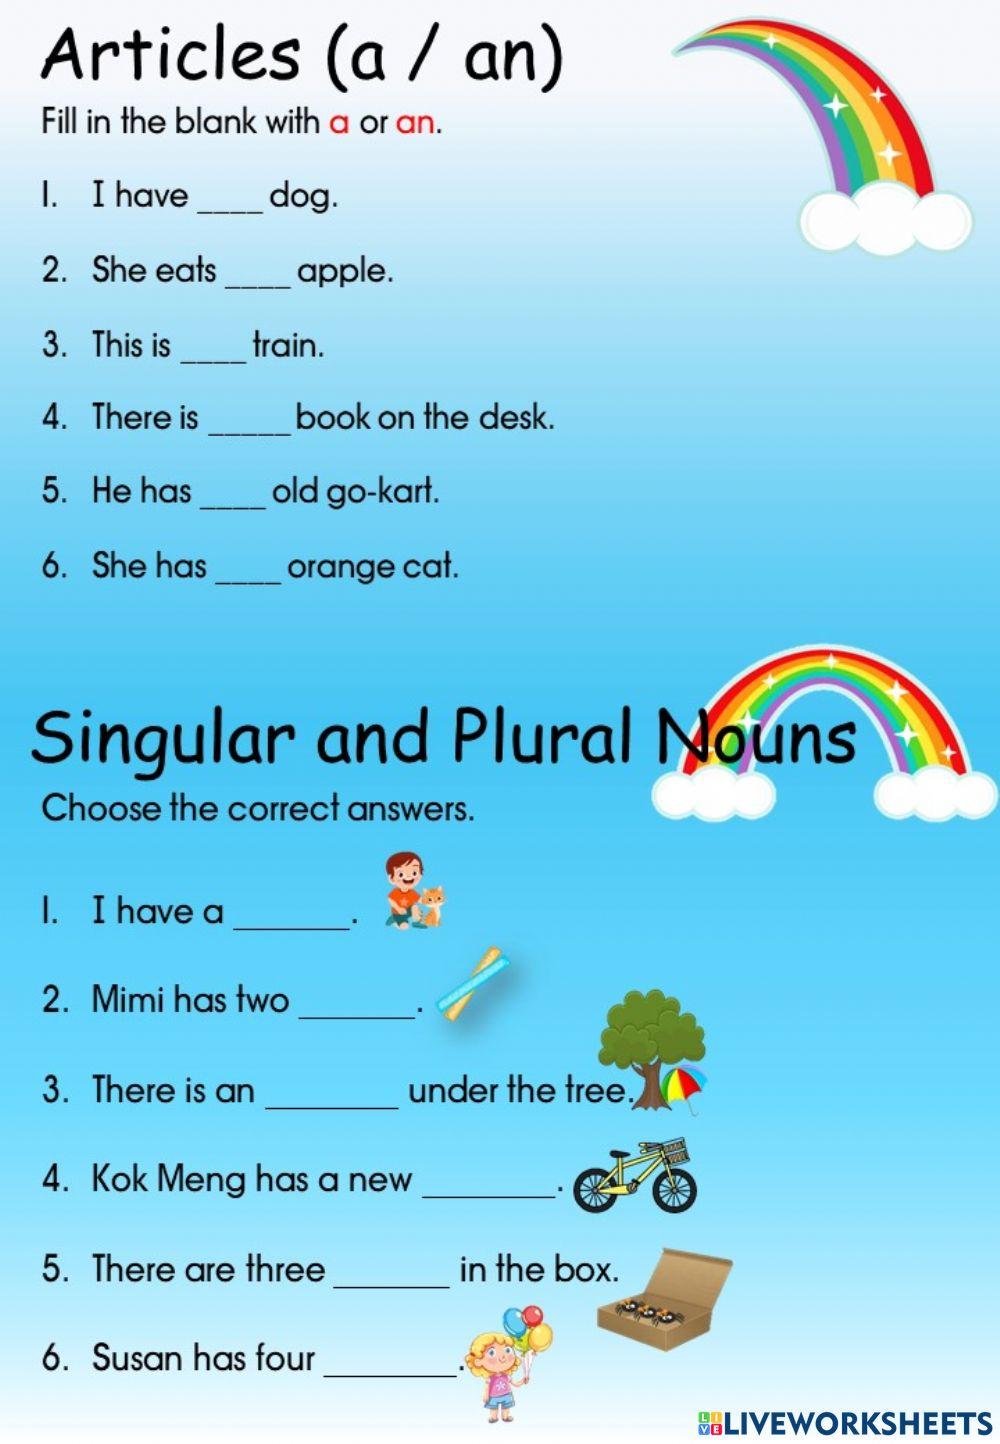 Articles & Singular and Plural Nouns